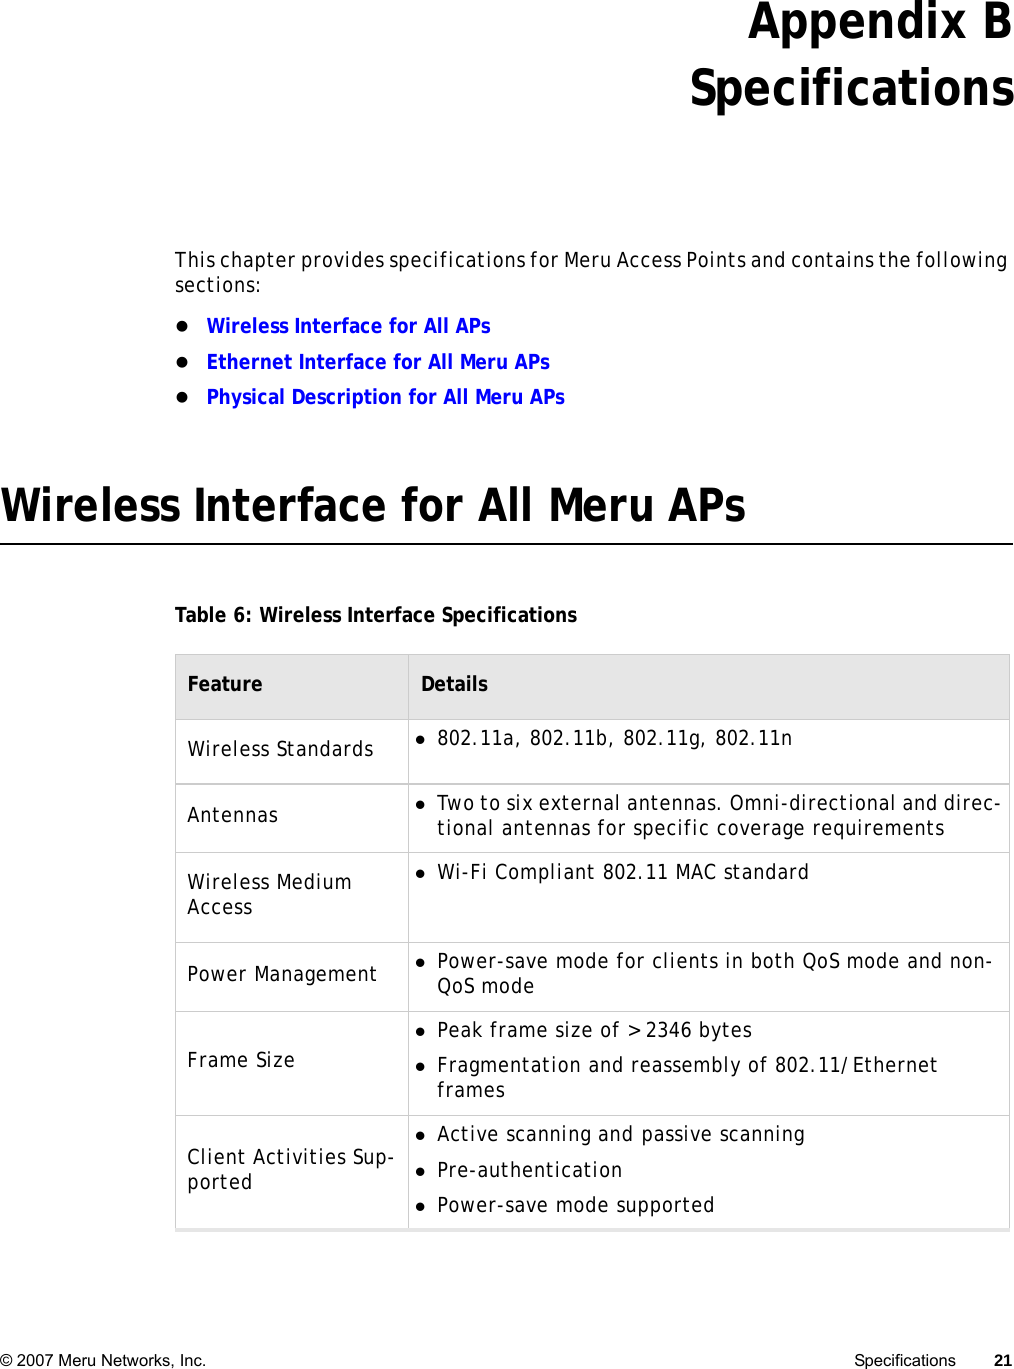 © 2007 Meru Networks, Inc. Specifications 21 Appendix BSpecificationsThis chapter provides specifications for Meru Access Points and contains the following sections:zWireless Interface for All APszEthernet Interface for All Meru APszPhysical Description for All Meru APsWireless Interface for All Meru APsTable 6: Wireless Interface SpecificationsFeature DetailsWireless Standards z802.11a, 802.11b, 802.11g, 802.11nAntennas zTwo to six external antennas. Omni-directional and direc-tional antennas for specific coverage requirementsWireless Medium AccesszWi-Fi Compliant 802.11 MAC standardPower Management zPower-save mode for clients in both QoS mode and non-QoS modeFrame SizezPeak frame size of &gt; 2346 byteszFragmentation and reassembly of 802.11/Ethernet framesClient Activities Sup-portedzActive scanning and passive scanningzPre-authenticationzPower-save mode supported